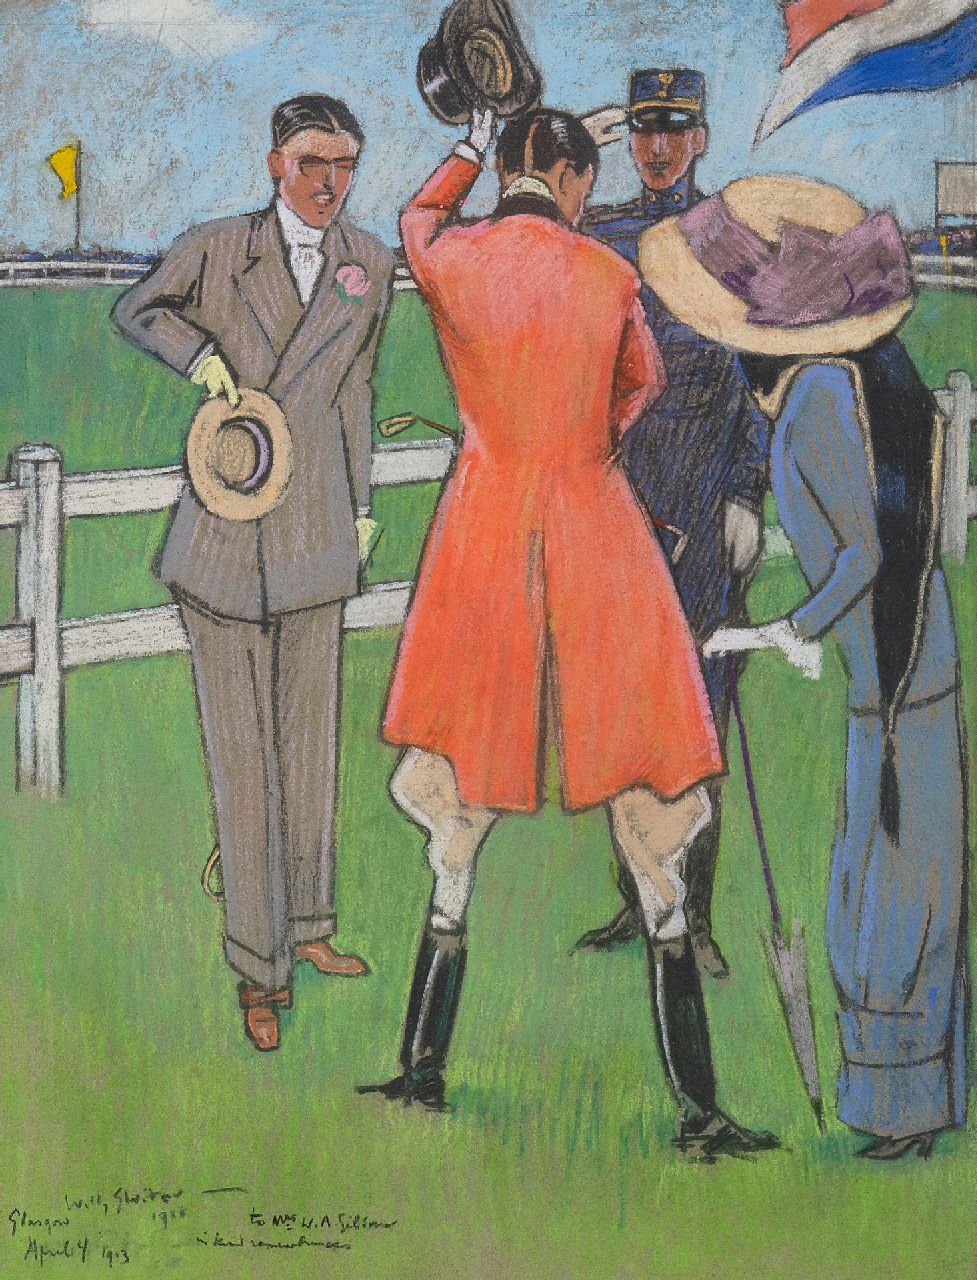 Sluiter J.W.  | Jan Willem 'Willy' Sluiter, On the racecourse, pastel on paper 40.5 x 32.0 cm, signed l.l. and dated April 4 1911